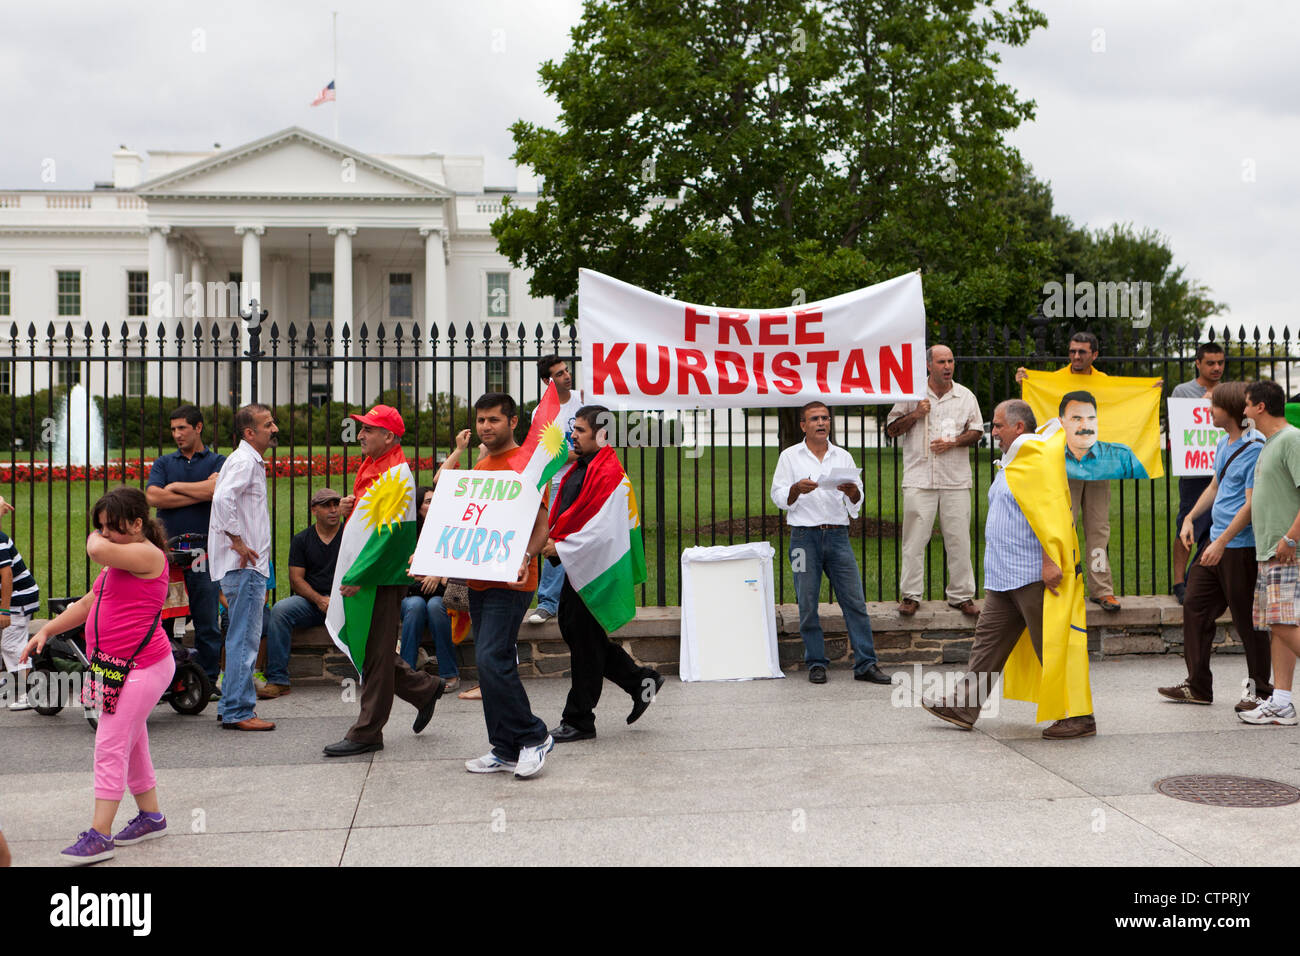 American Kurds protest in front of the White House Stock Photo